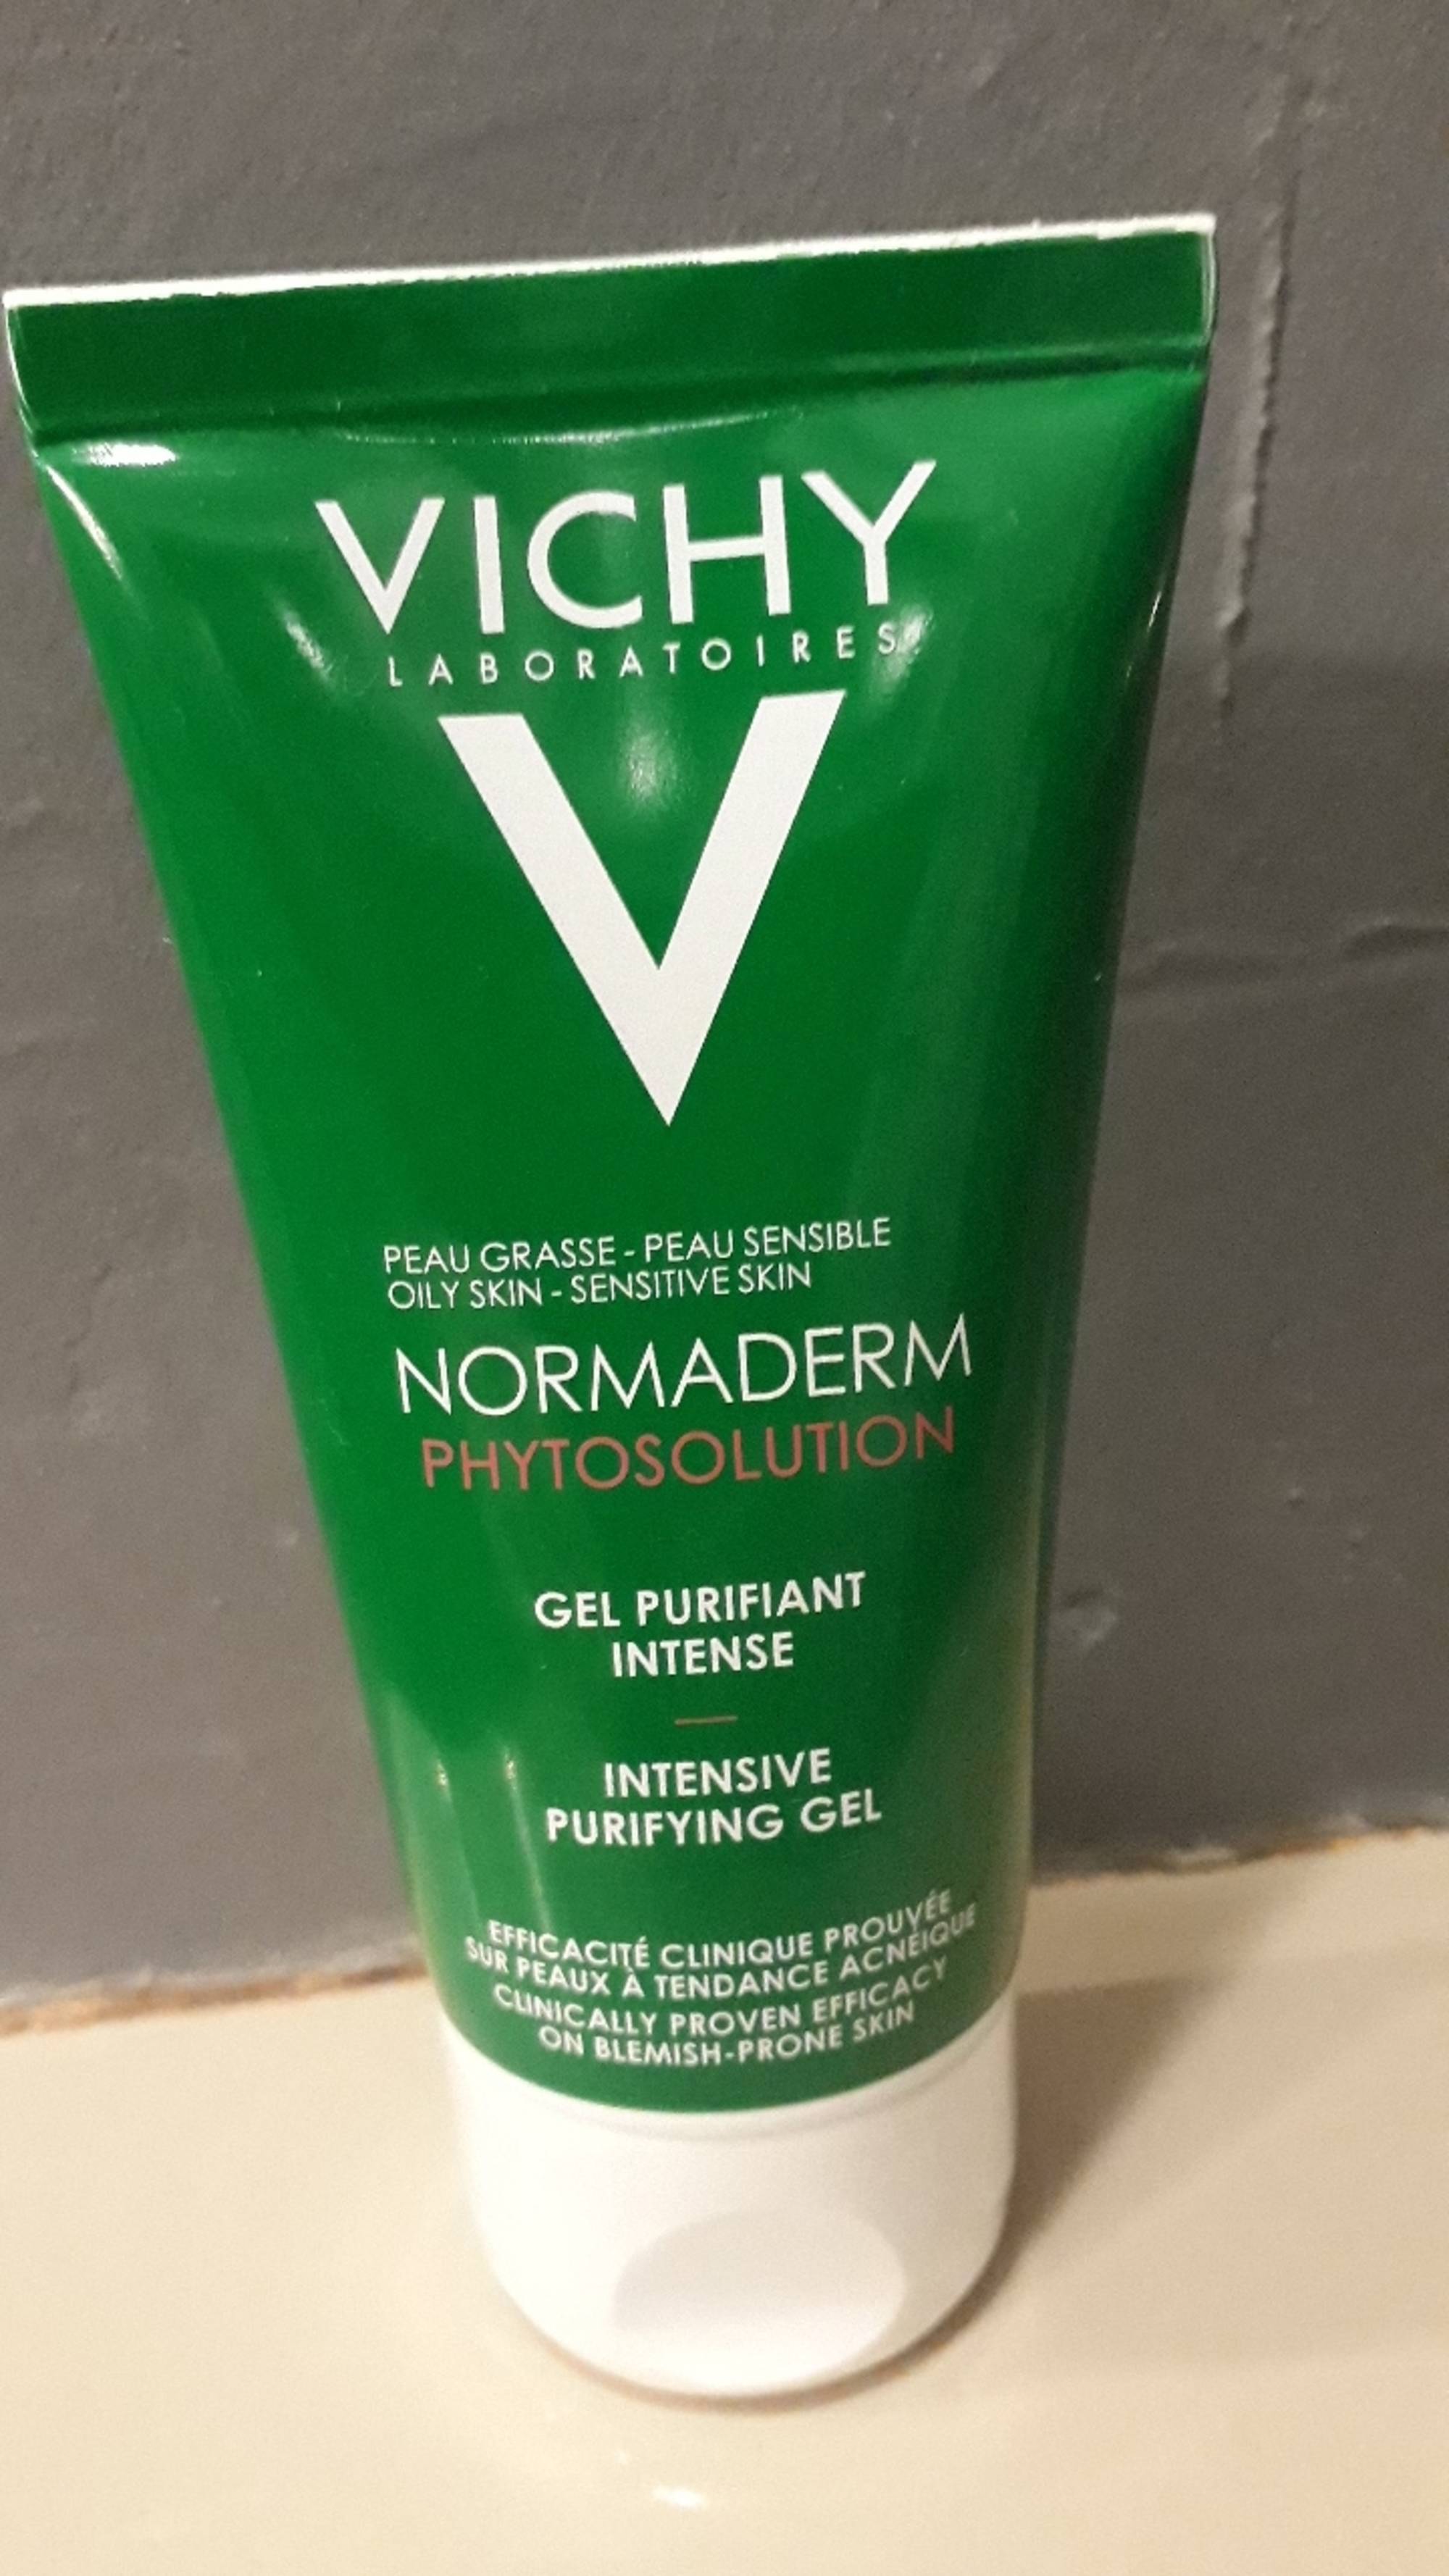 VICHY - Normaderm phytosolution - Gel purifiant intense